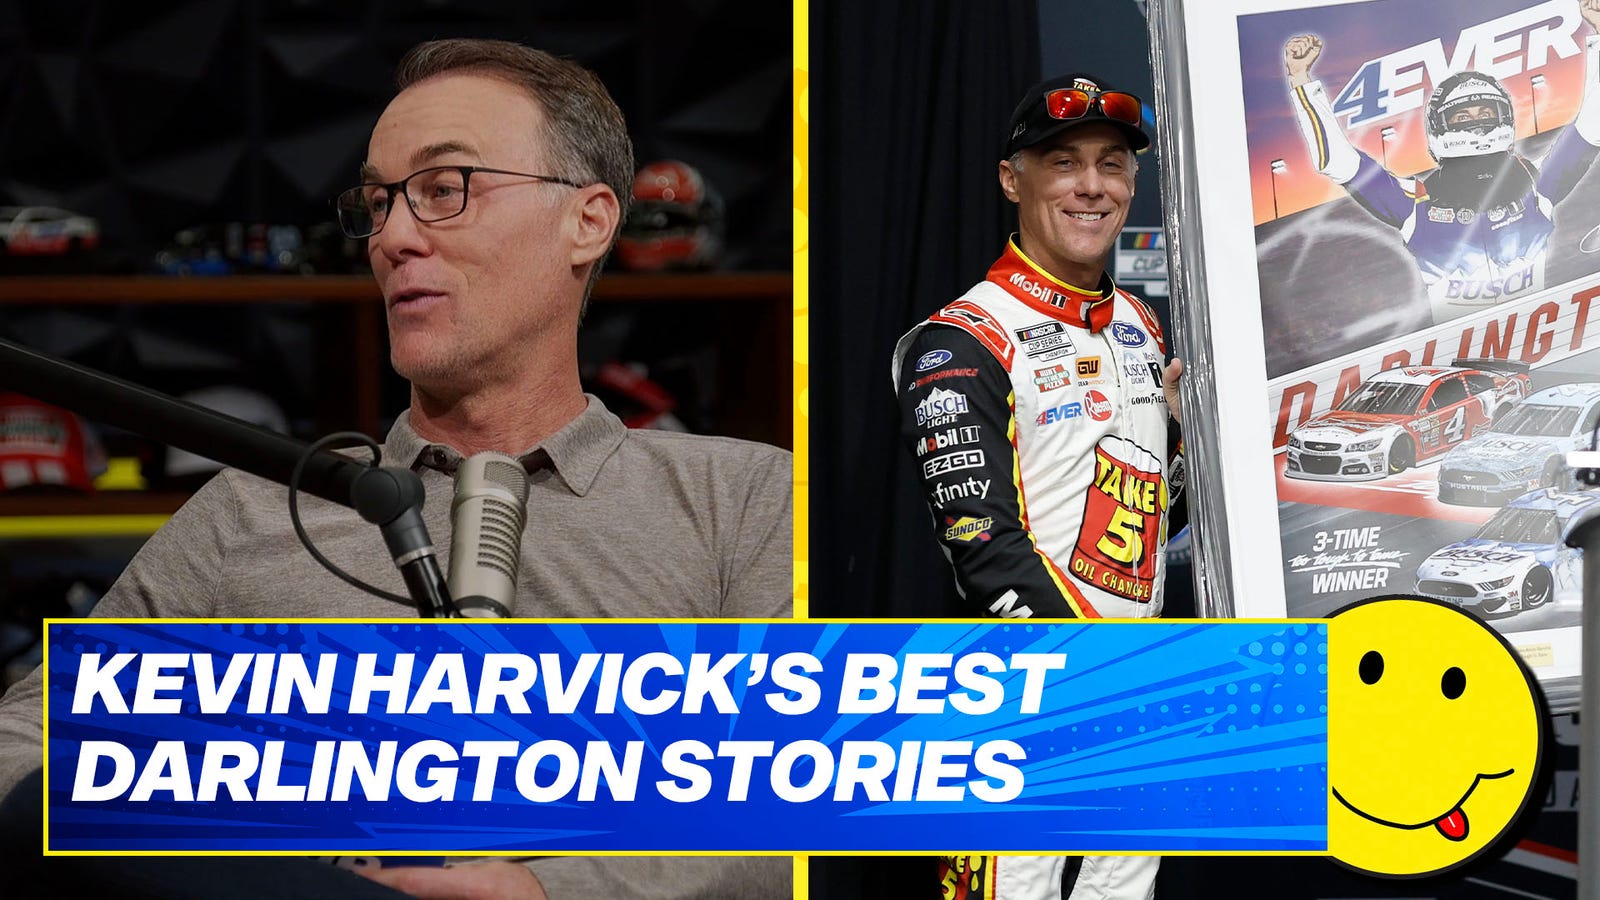 Kevin Harvick's best stories from racing at Darlington